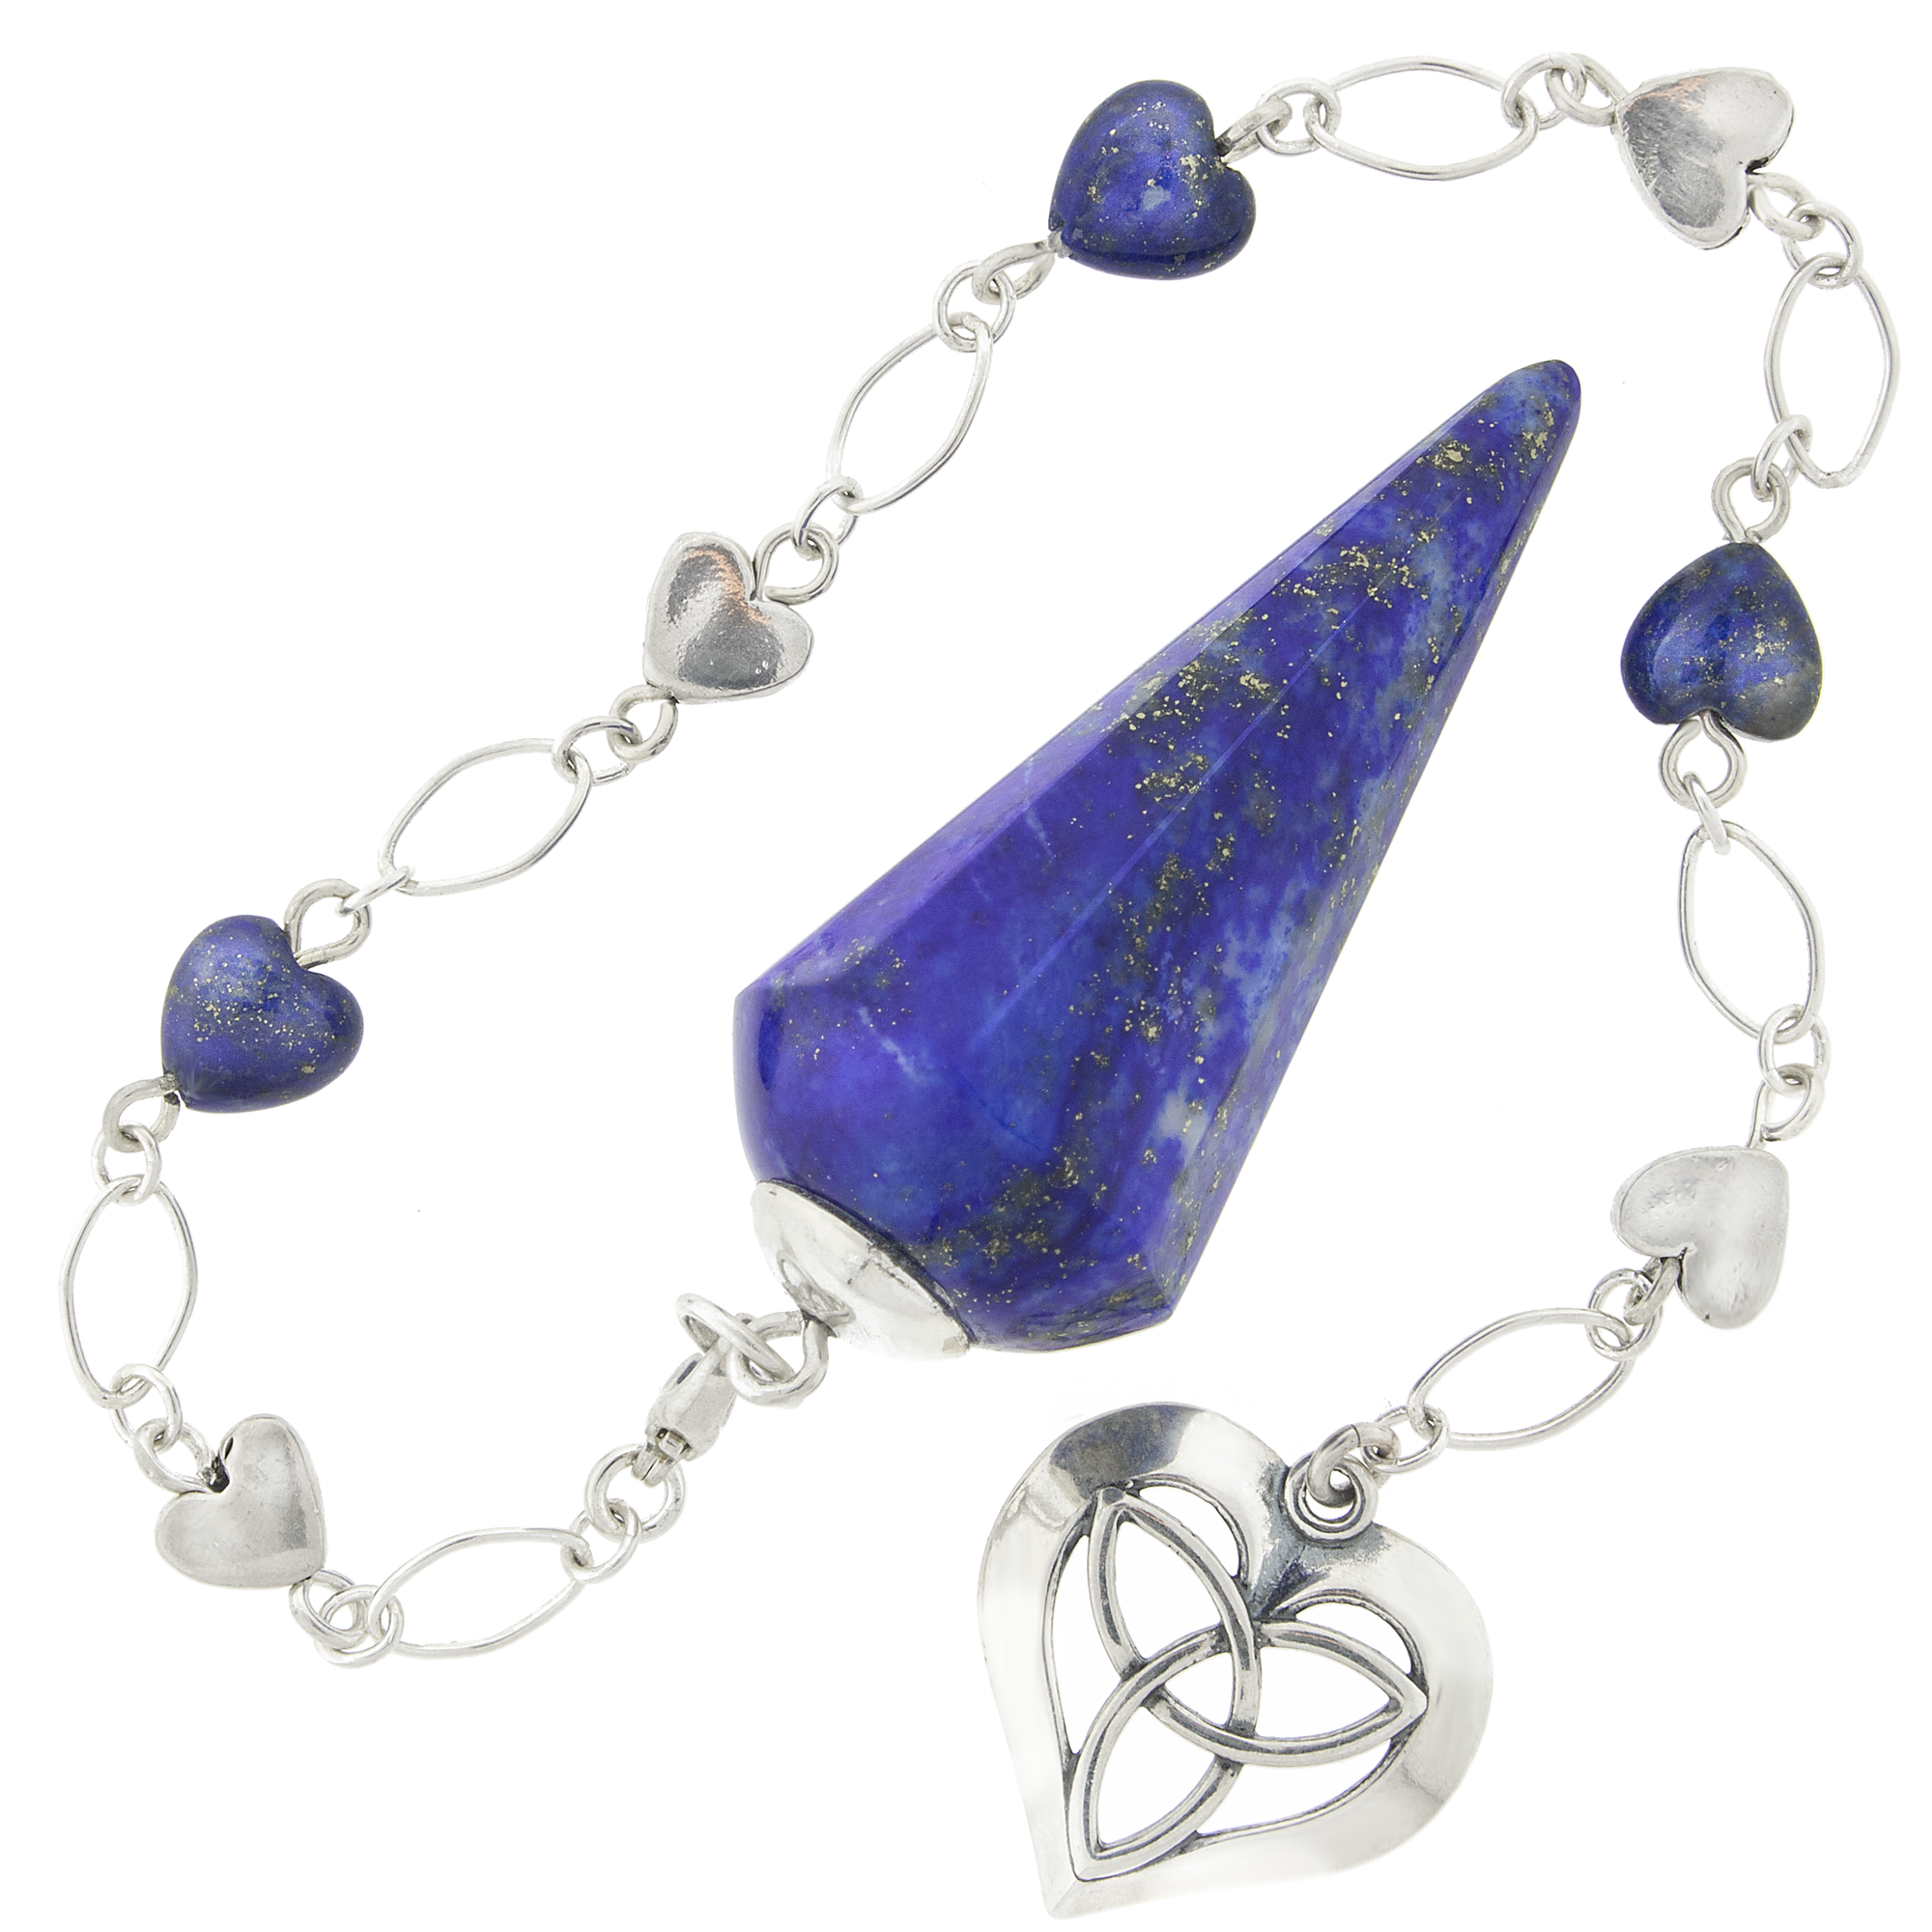 One of a Kind #391 - Lapis Lazuli and Sterling Silver Pendulum by Ask Your Pendulum